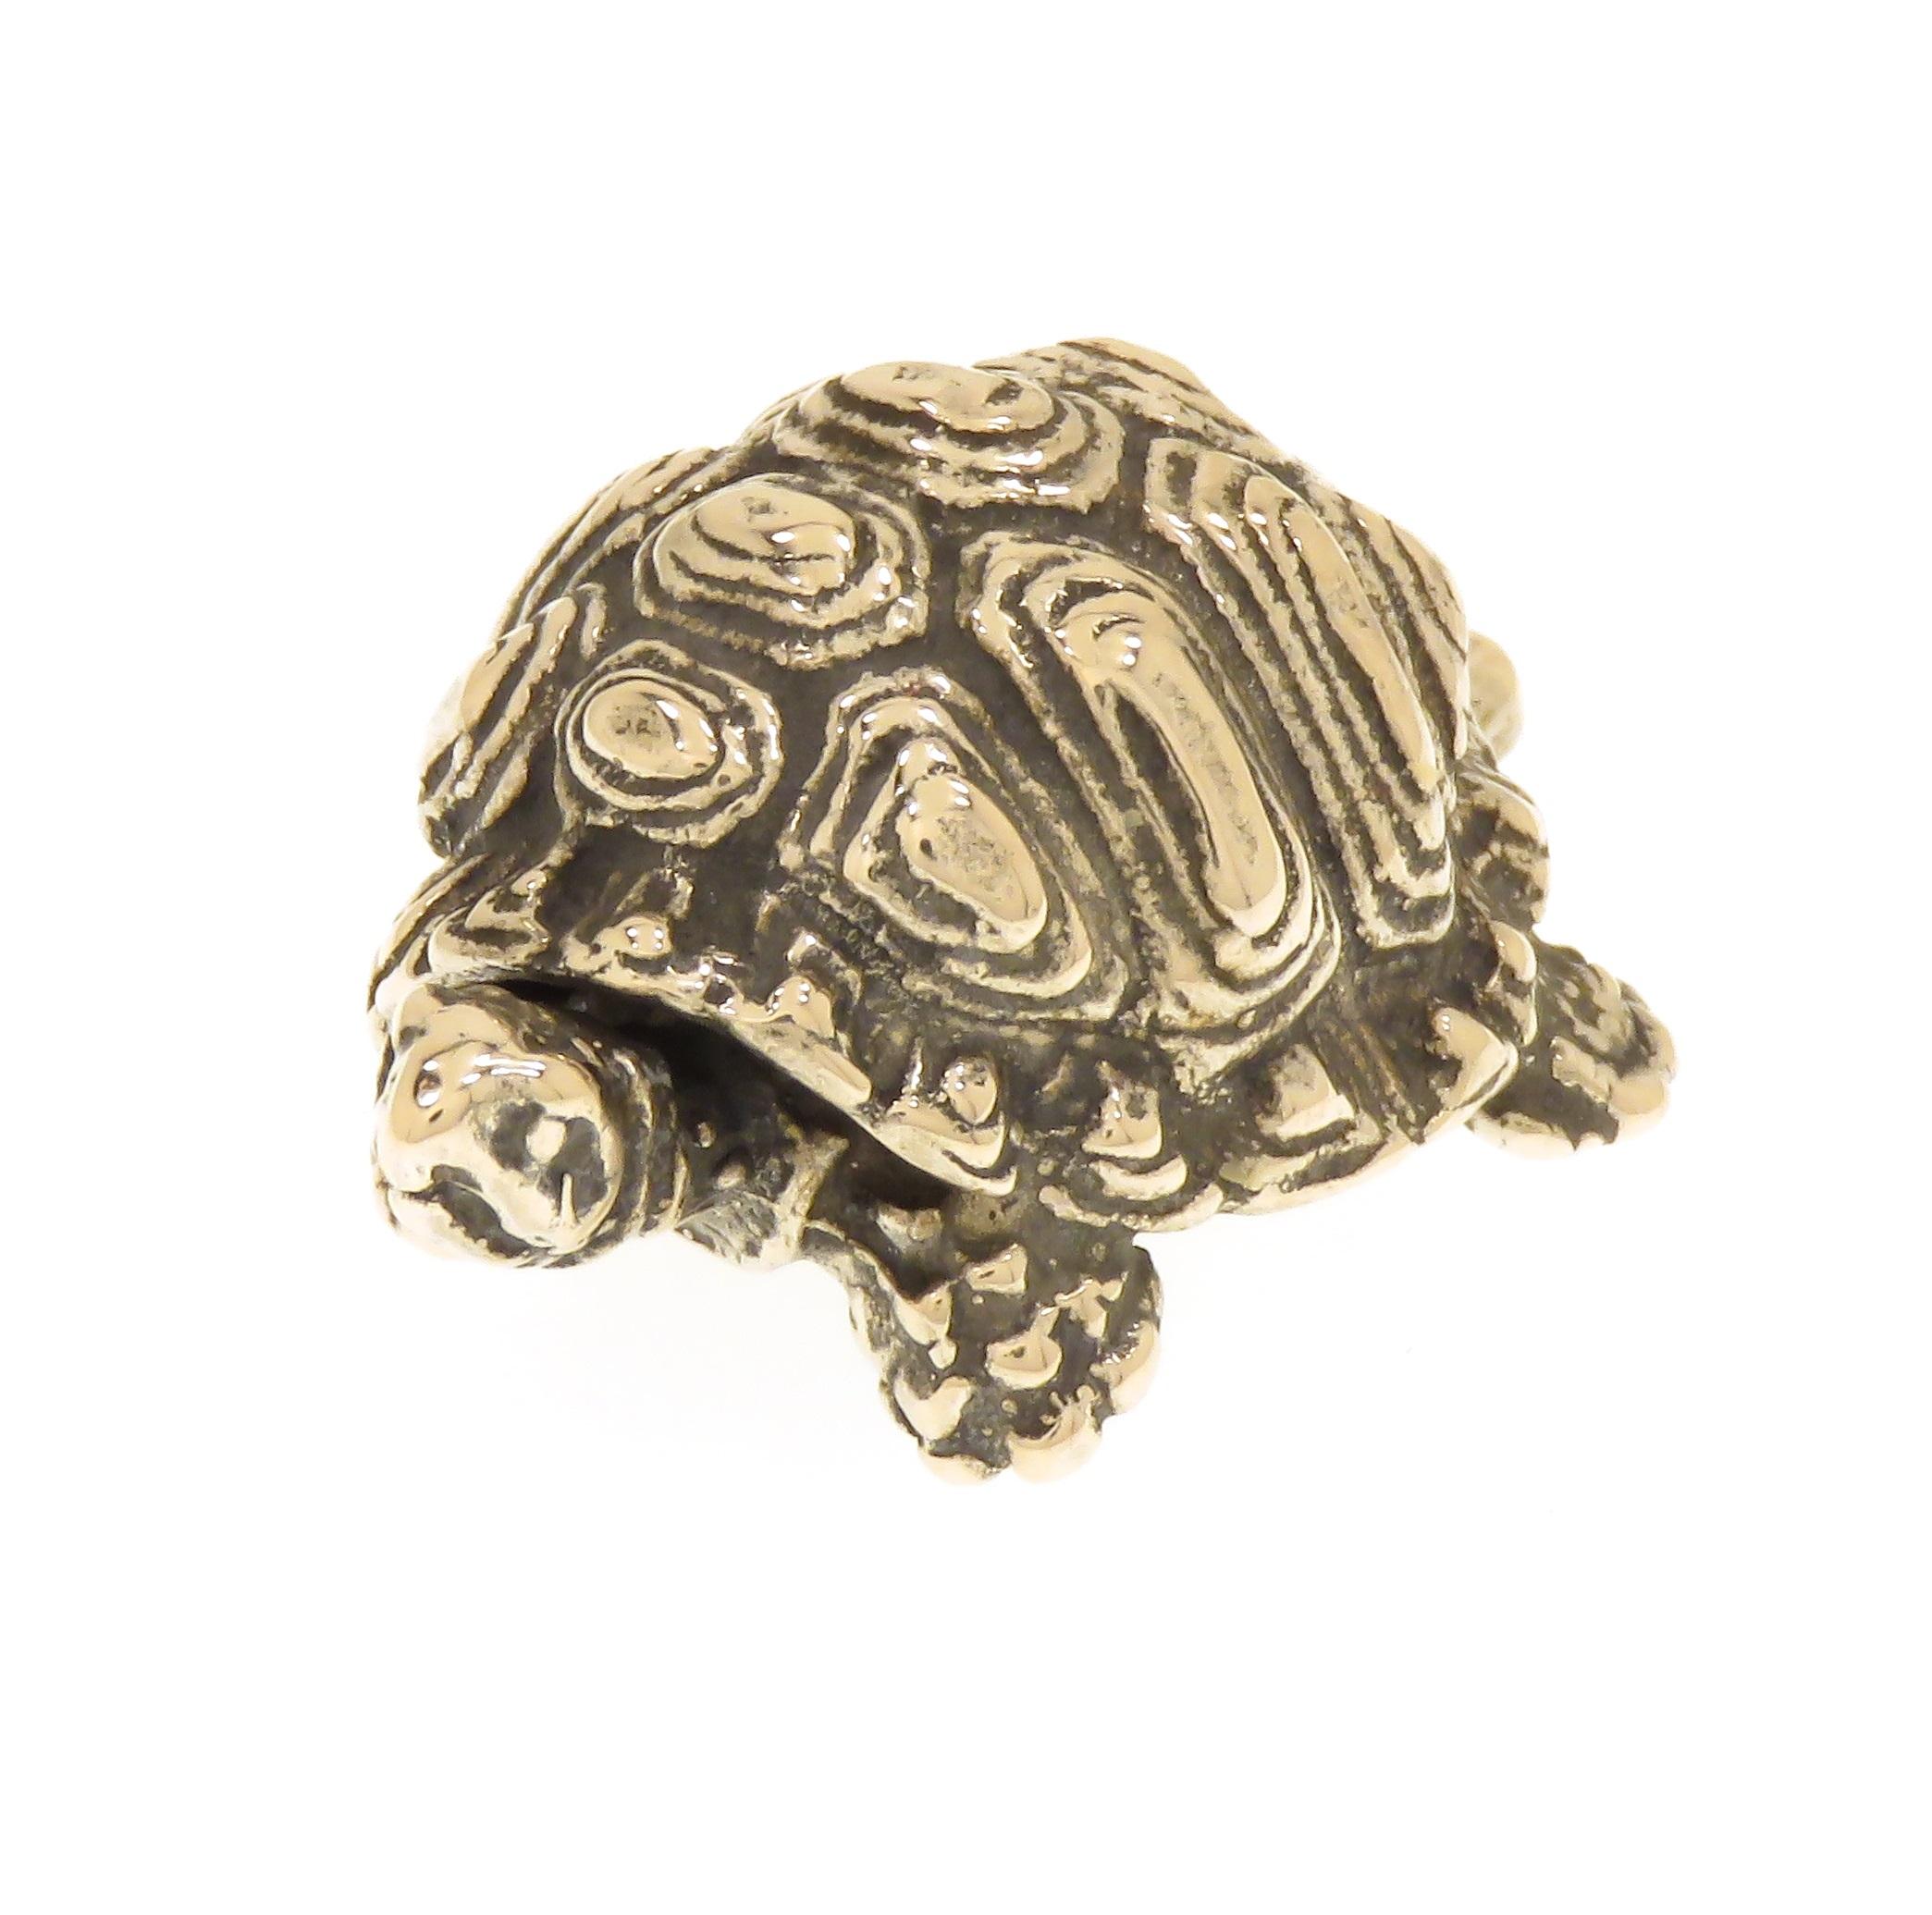 Solid silver turtle very good vintage condition.
Dimensions: Height 14 mm / 0.511 inches - Length 29 mm / 1.141inches - Weight 10 grams.
It  is stamped with the Silver Italian Mark 800 and Italian brandmark 181VA.

Hancrafted in: silver